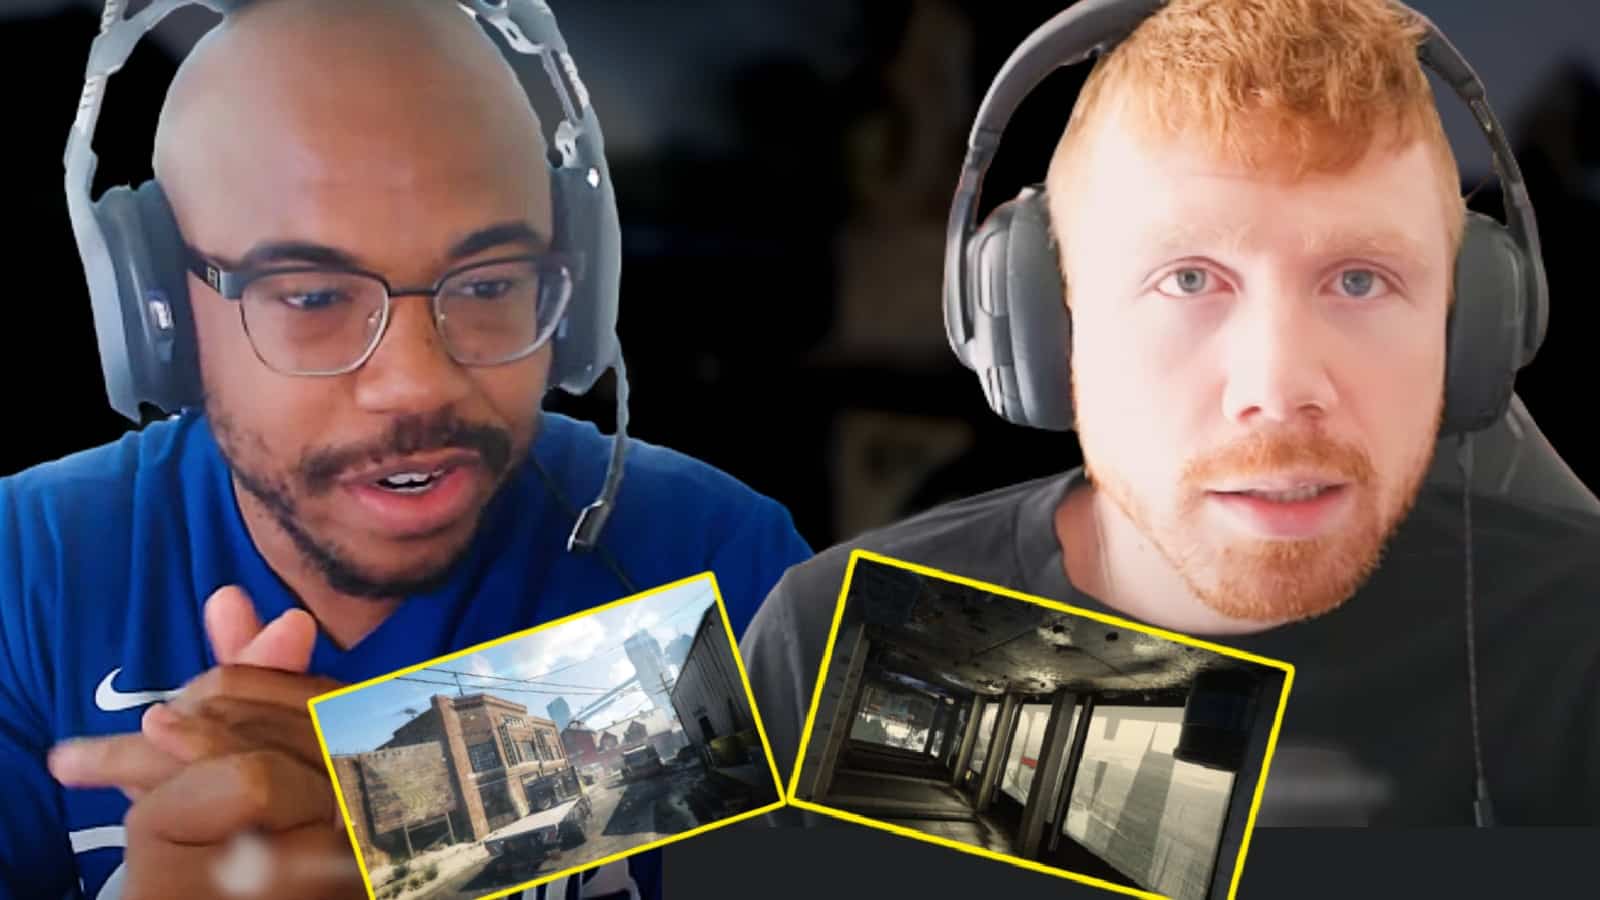 Enable and Pacman on reverse sweep create best of 5 competitive CoD series